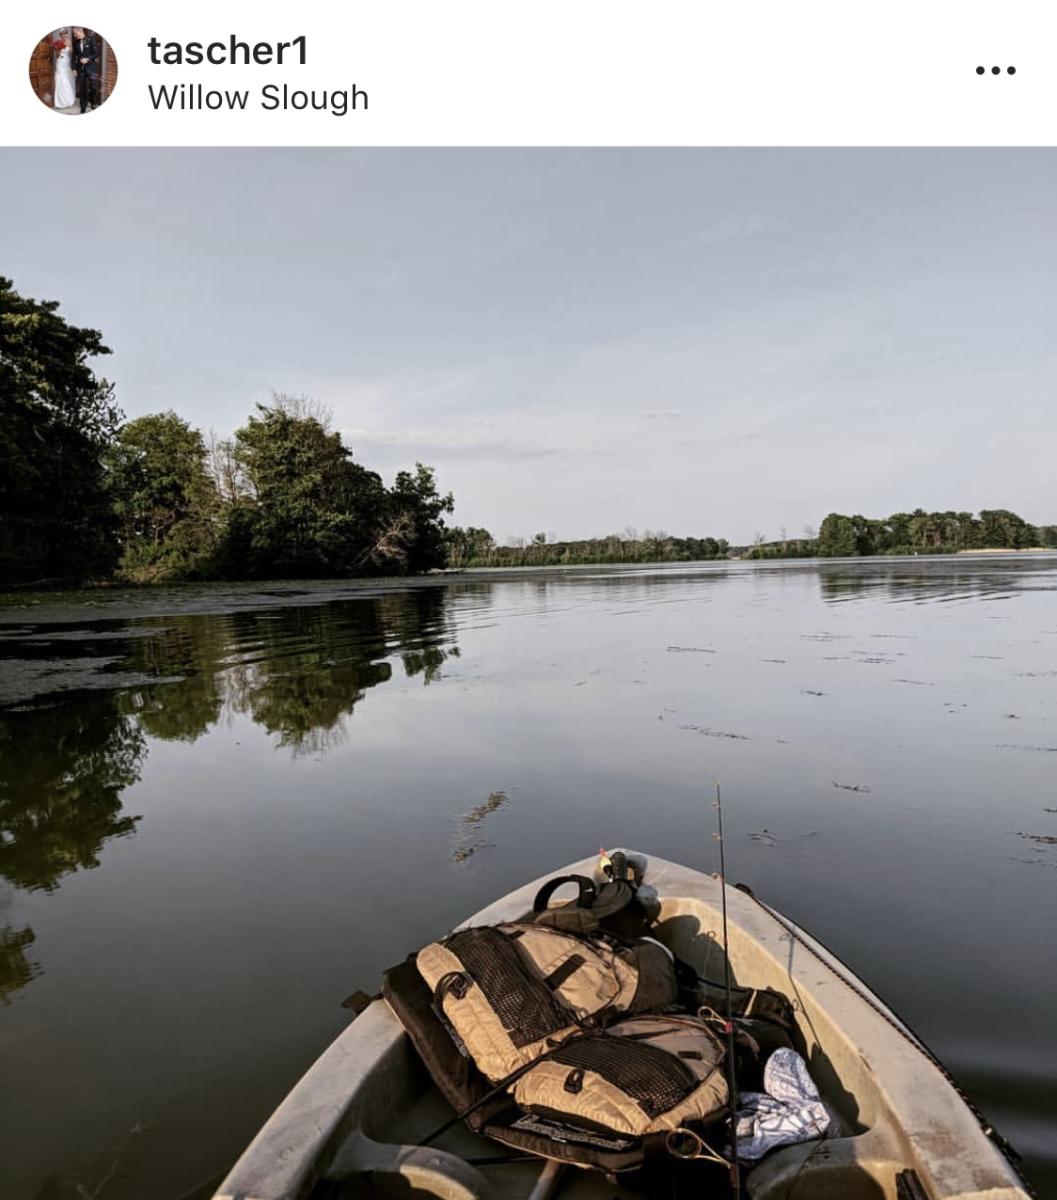 Fishing boat at Willow Slough - instagram @tascher1